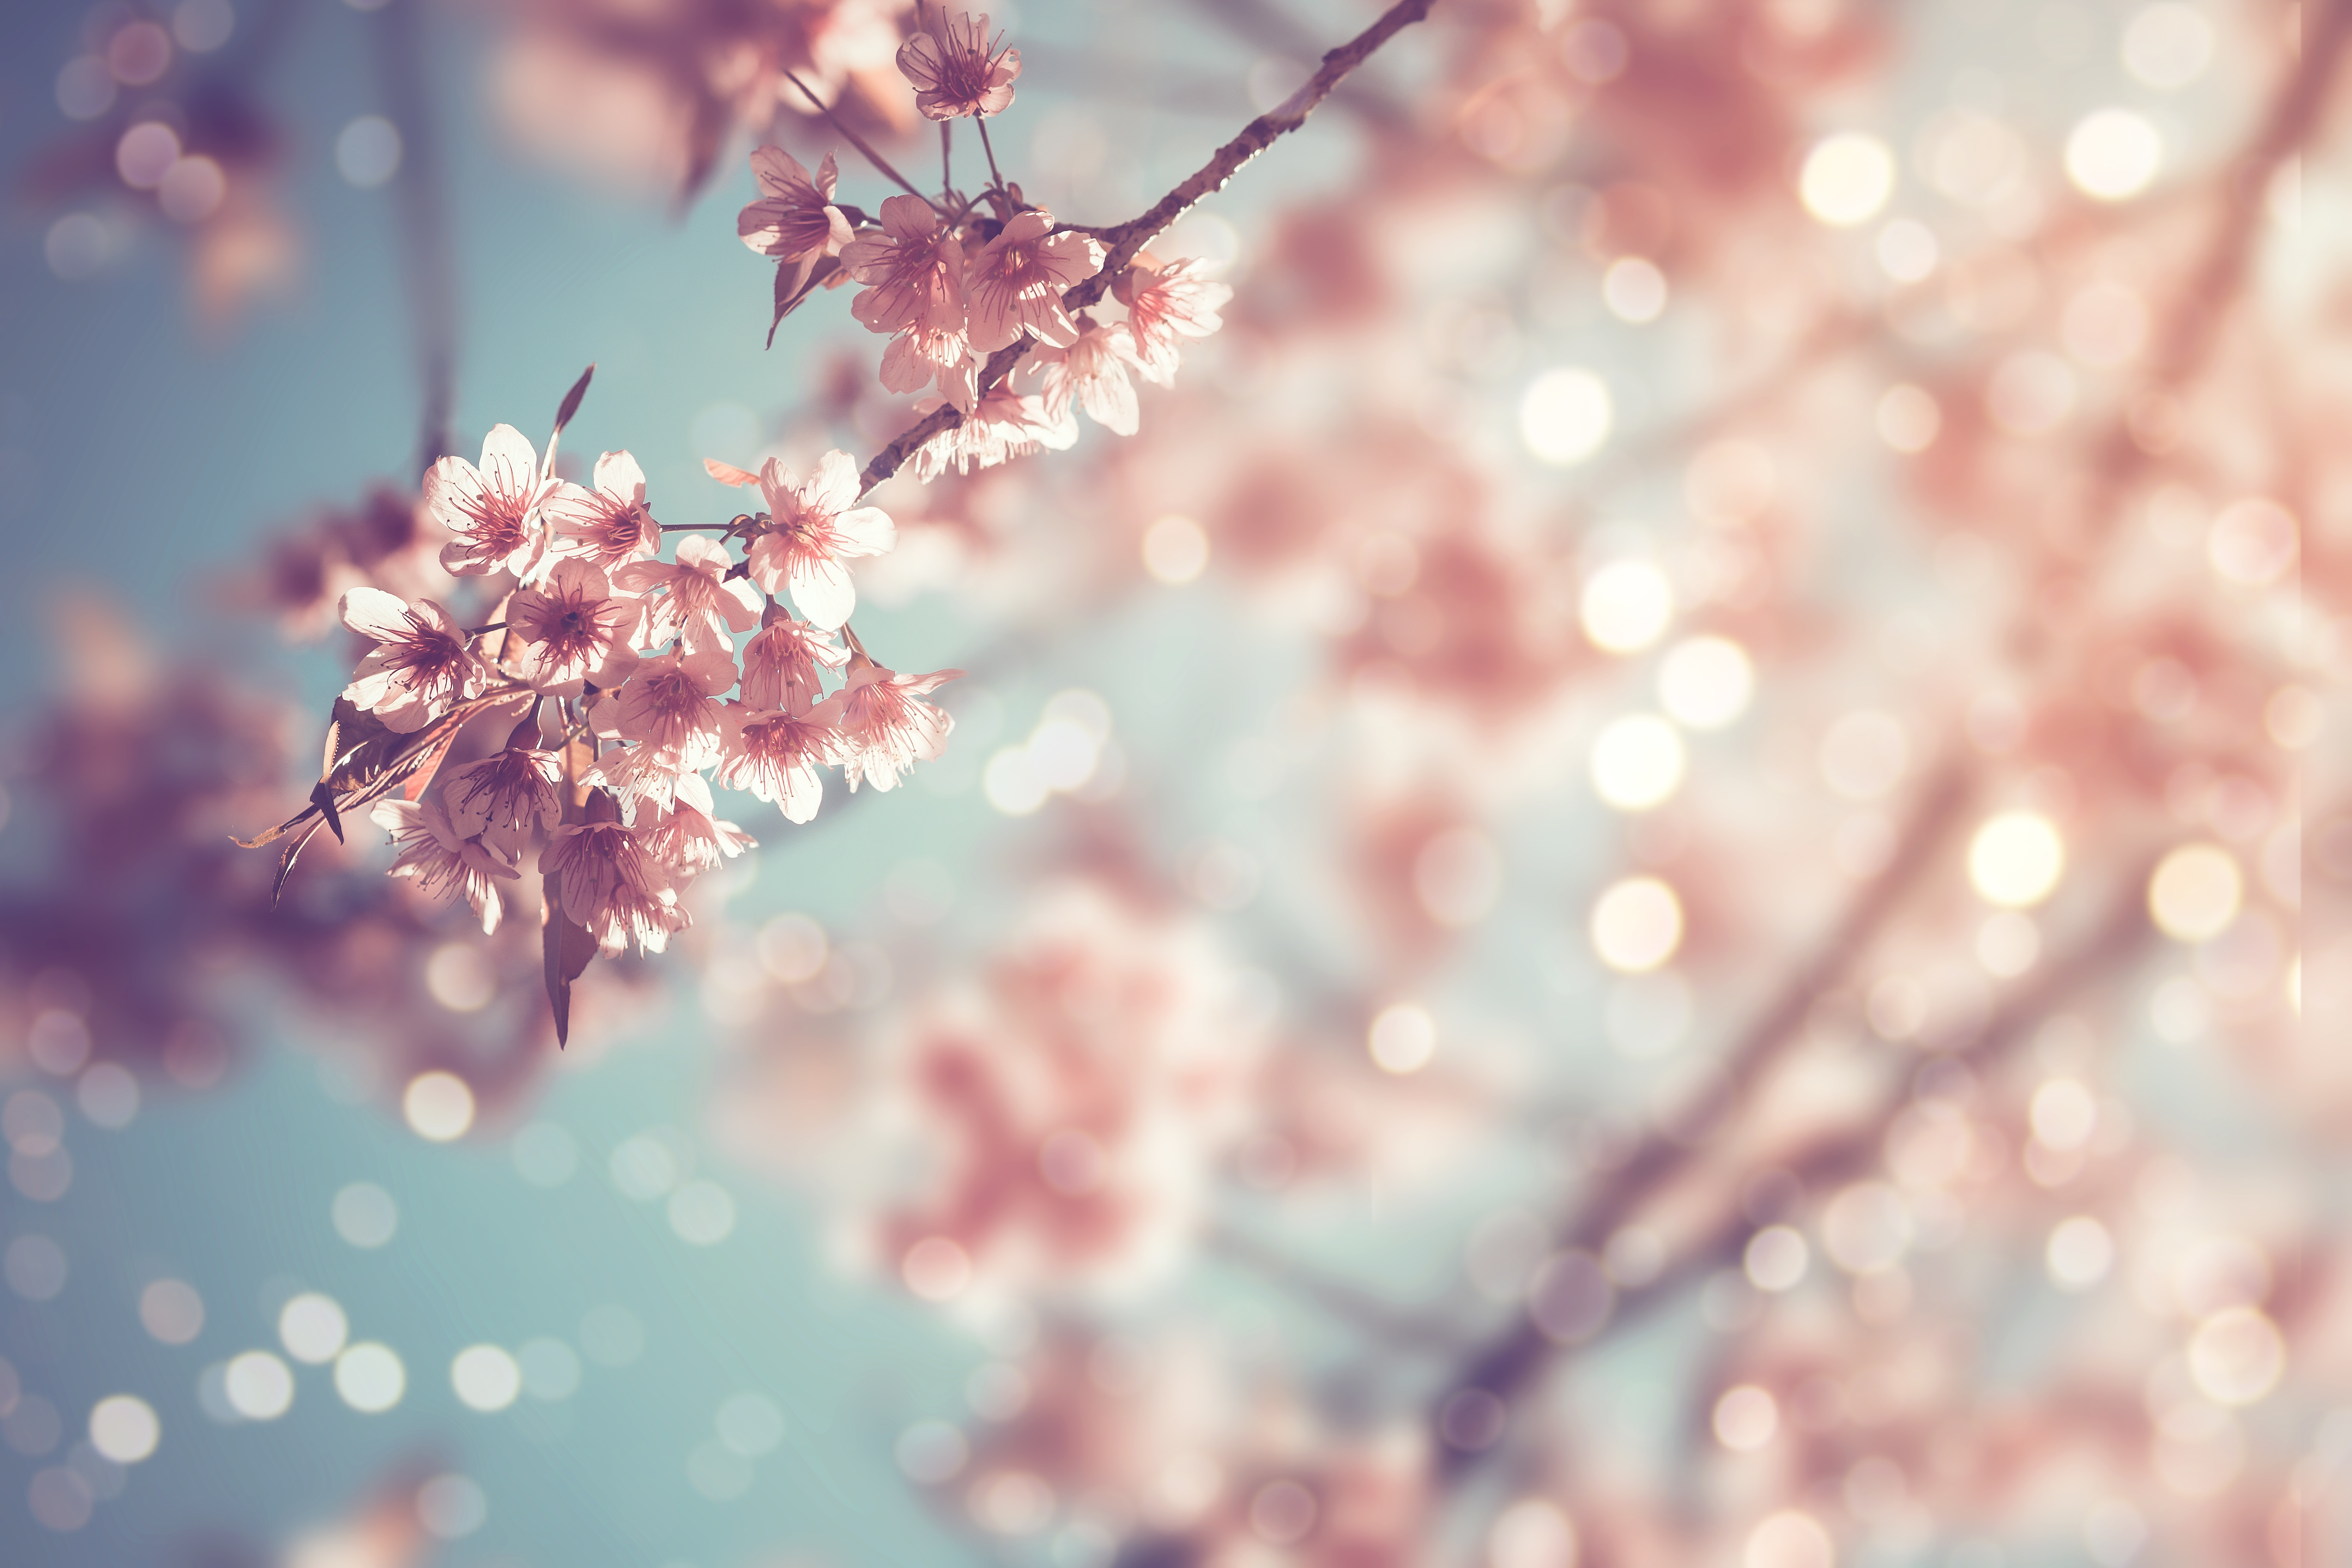 Travel Inspo: Life Lessons From The Cherry Blossoms of Japan